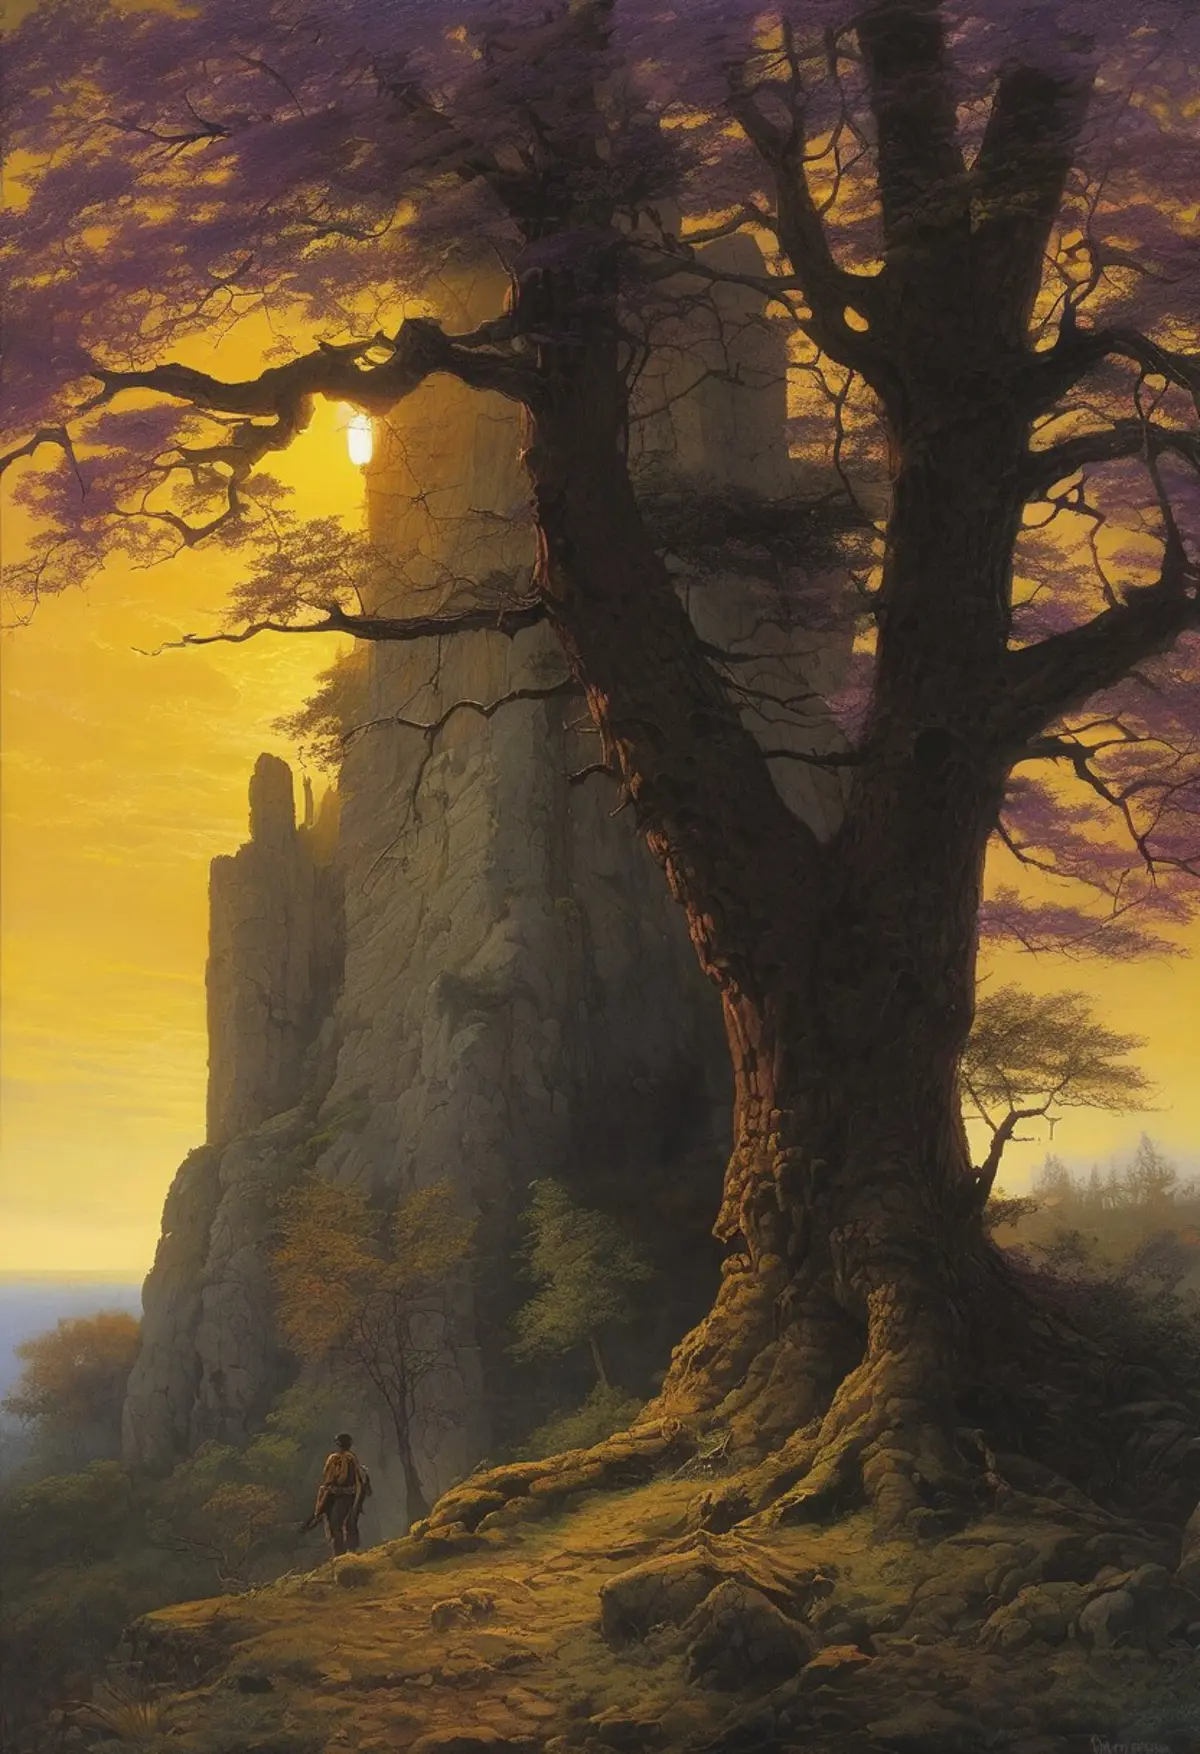 A natural landscape with a sky filled with a soft golden light that permeates the scene. The setting is characterized by a towering rock formation in the center. In front of this geological feature, a person waits under an enormous tree with widespread branches and purple-hued leaves. The tree’s roots are visibly entwined around the rocky ground